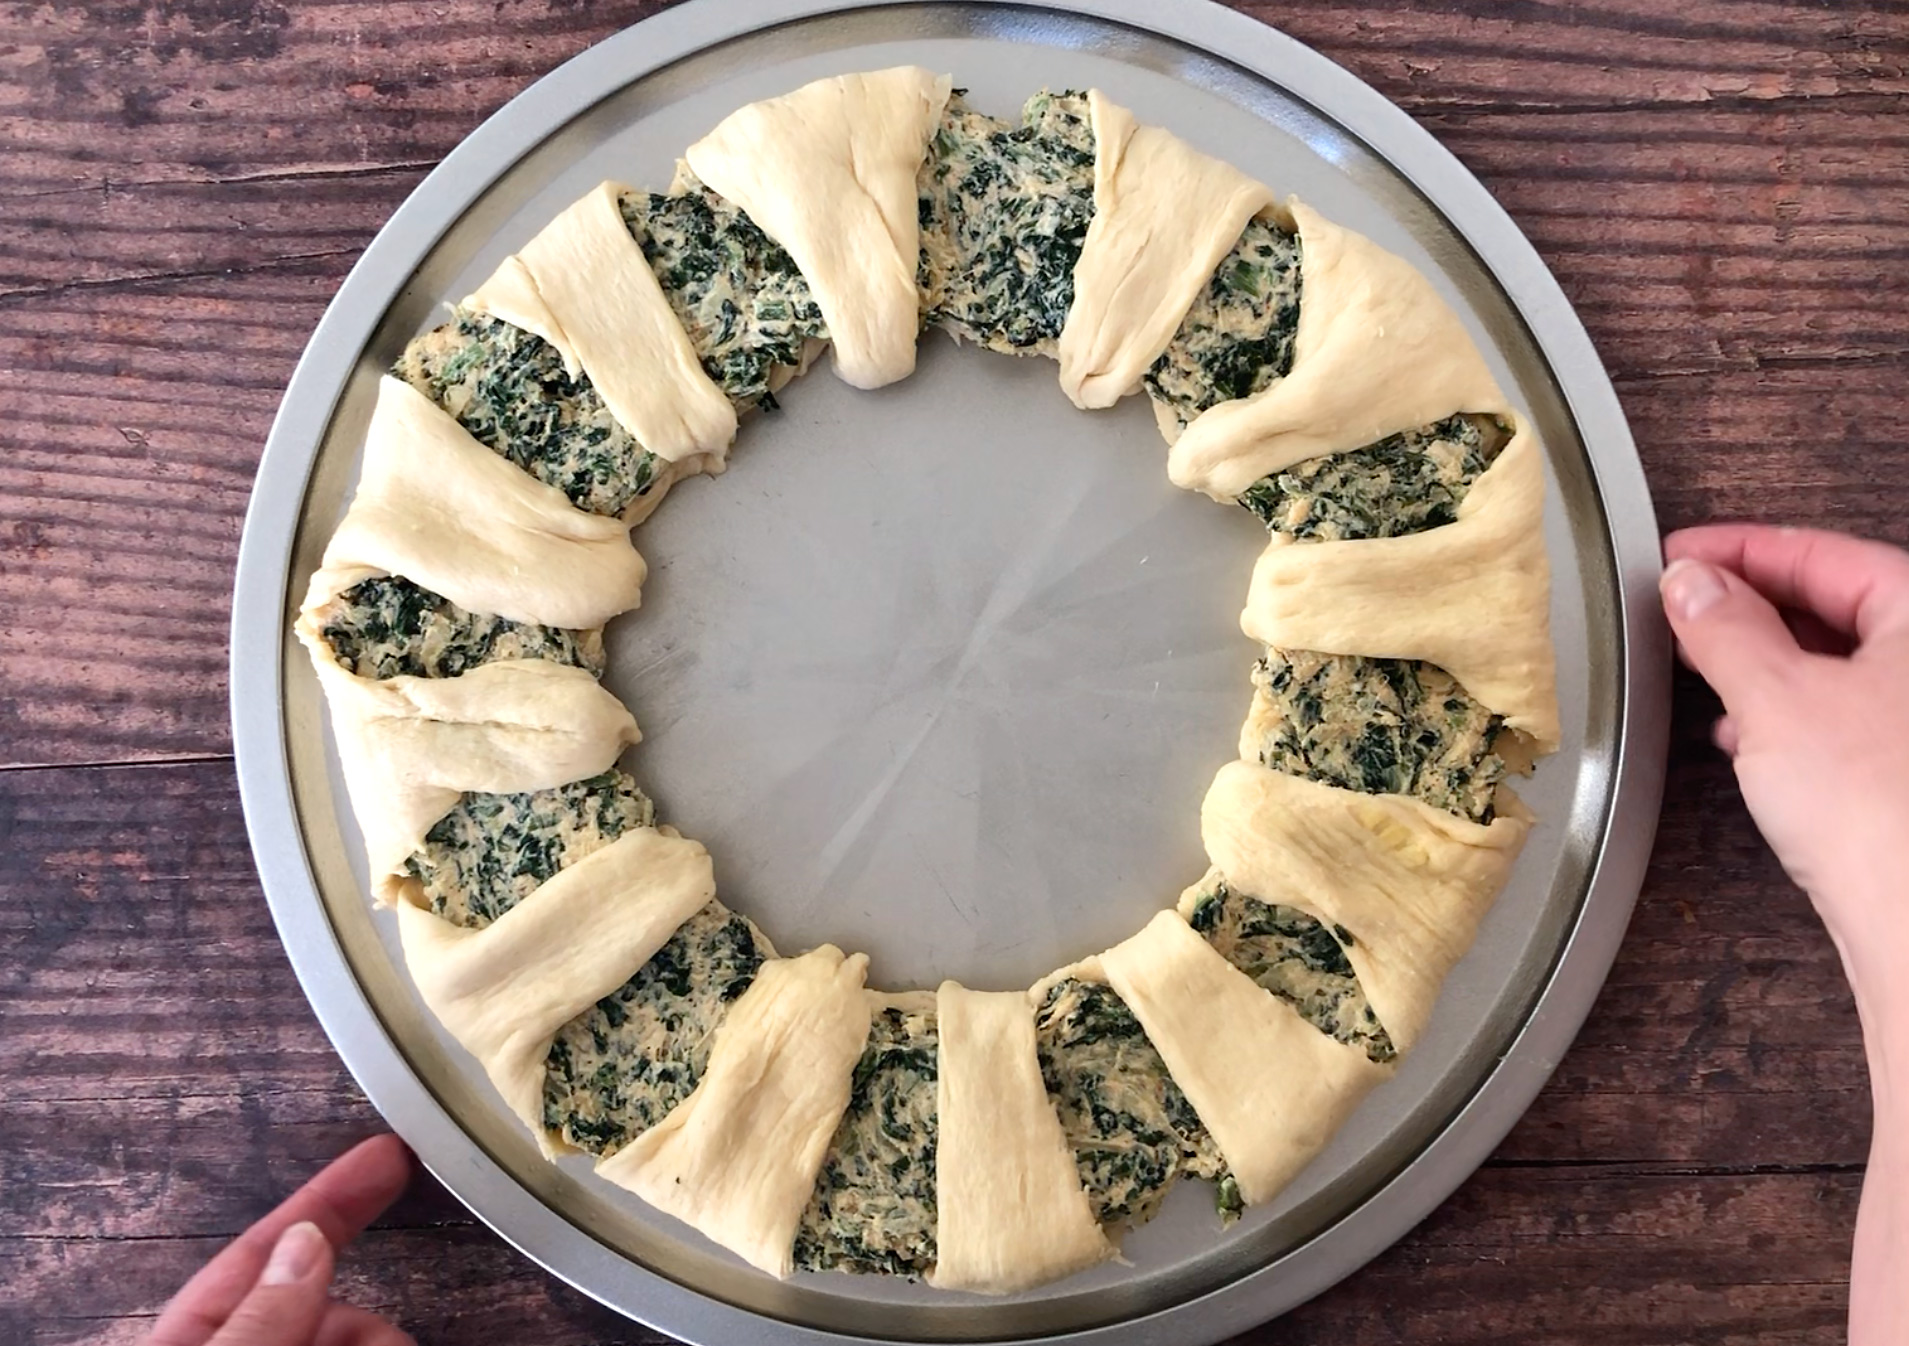 Raw crescent dough slices arranged in a wreath shape filled with spinach dip on a pizza pan